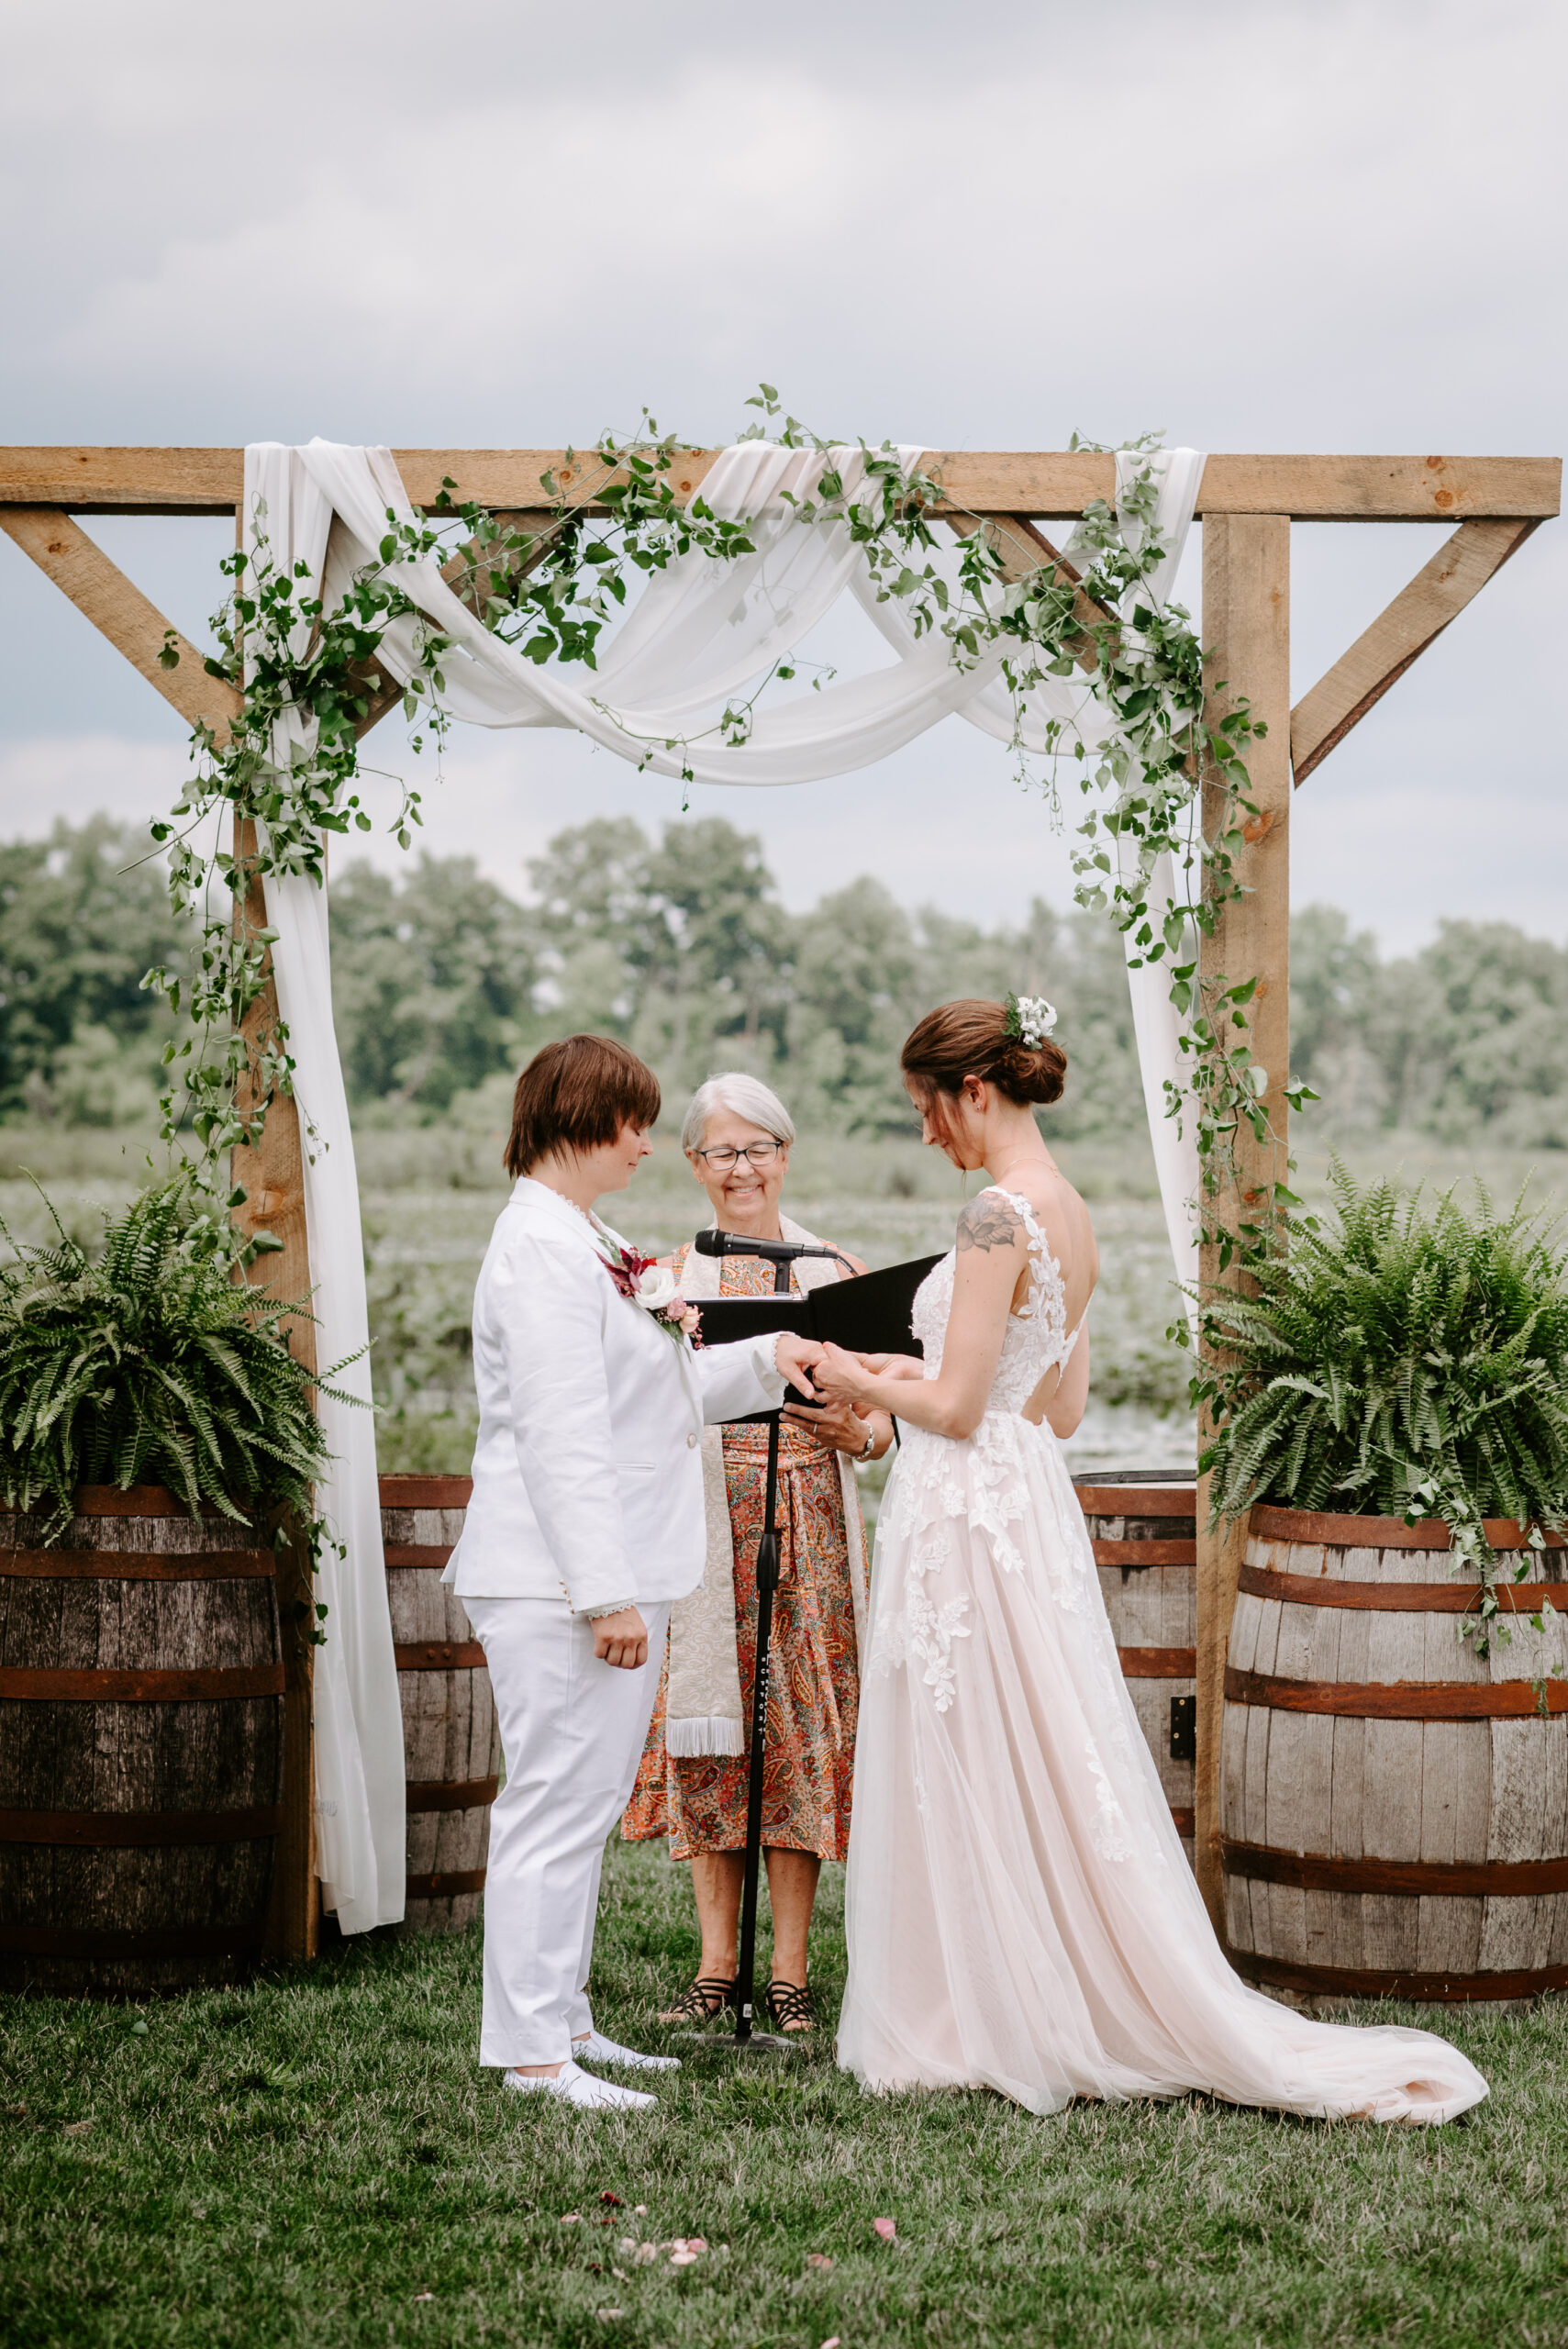 image of two brides getting married during their backyard wedding ceremony one bride in j crew suit one bride in white wedding dress lgbtq wedding in lawton michigan photograped by queer wedding photographer Liv Lyszyk Photography